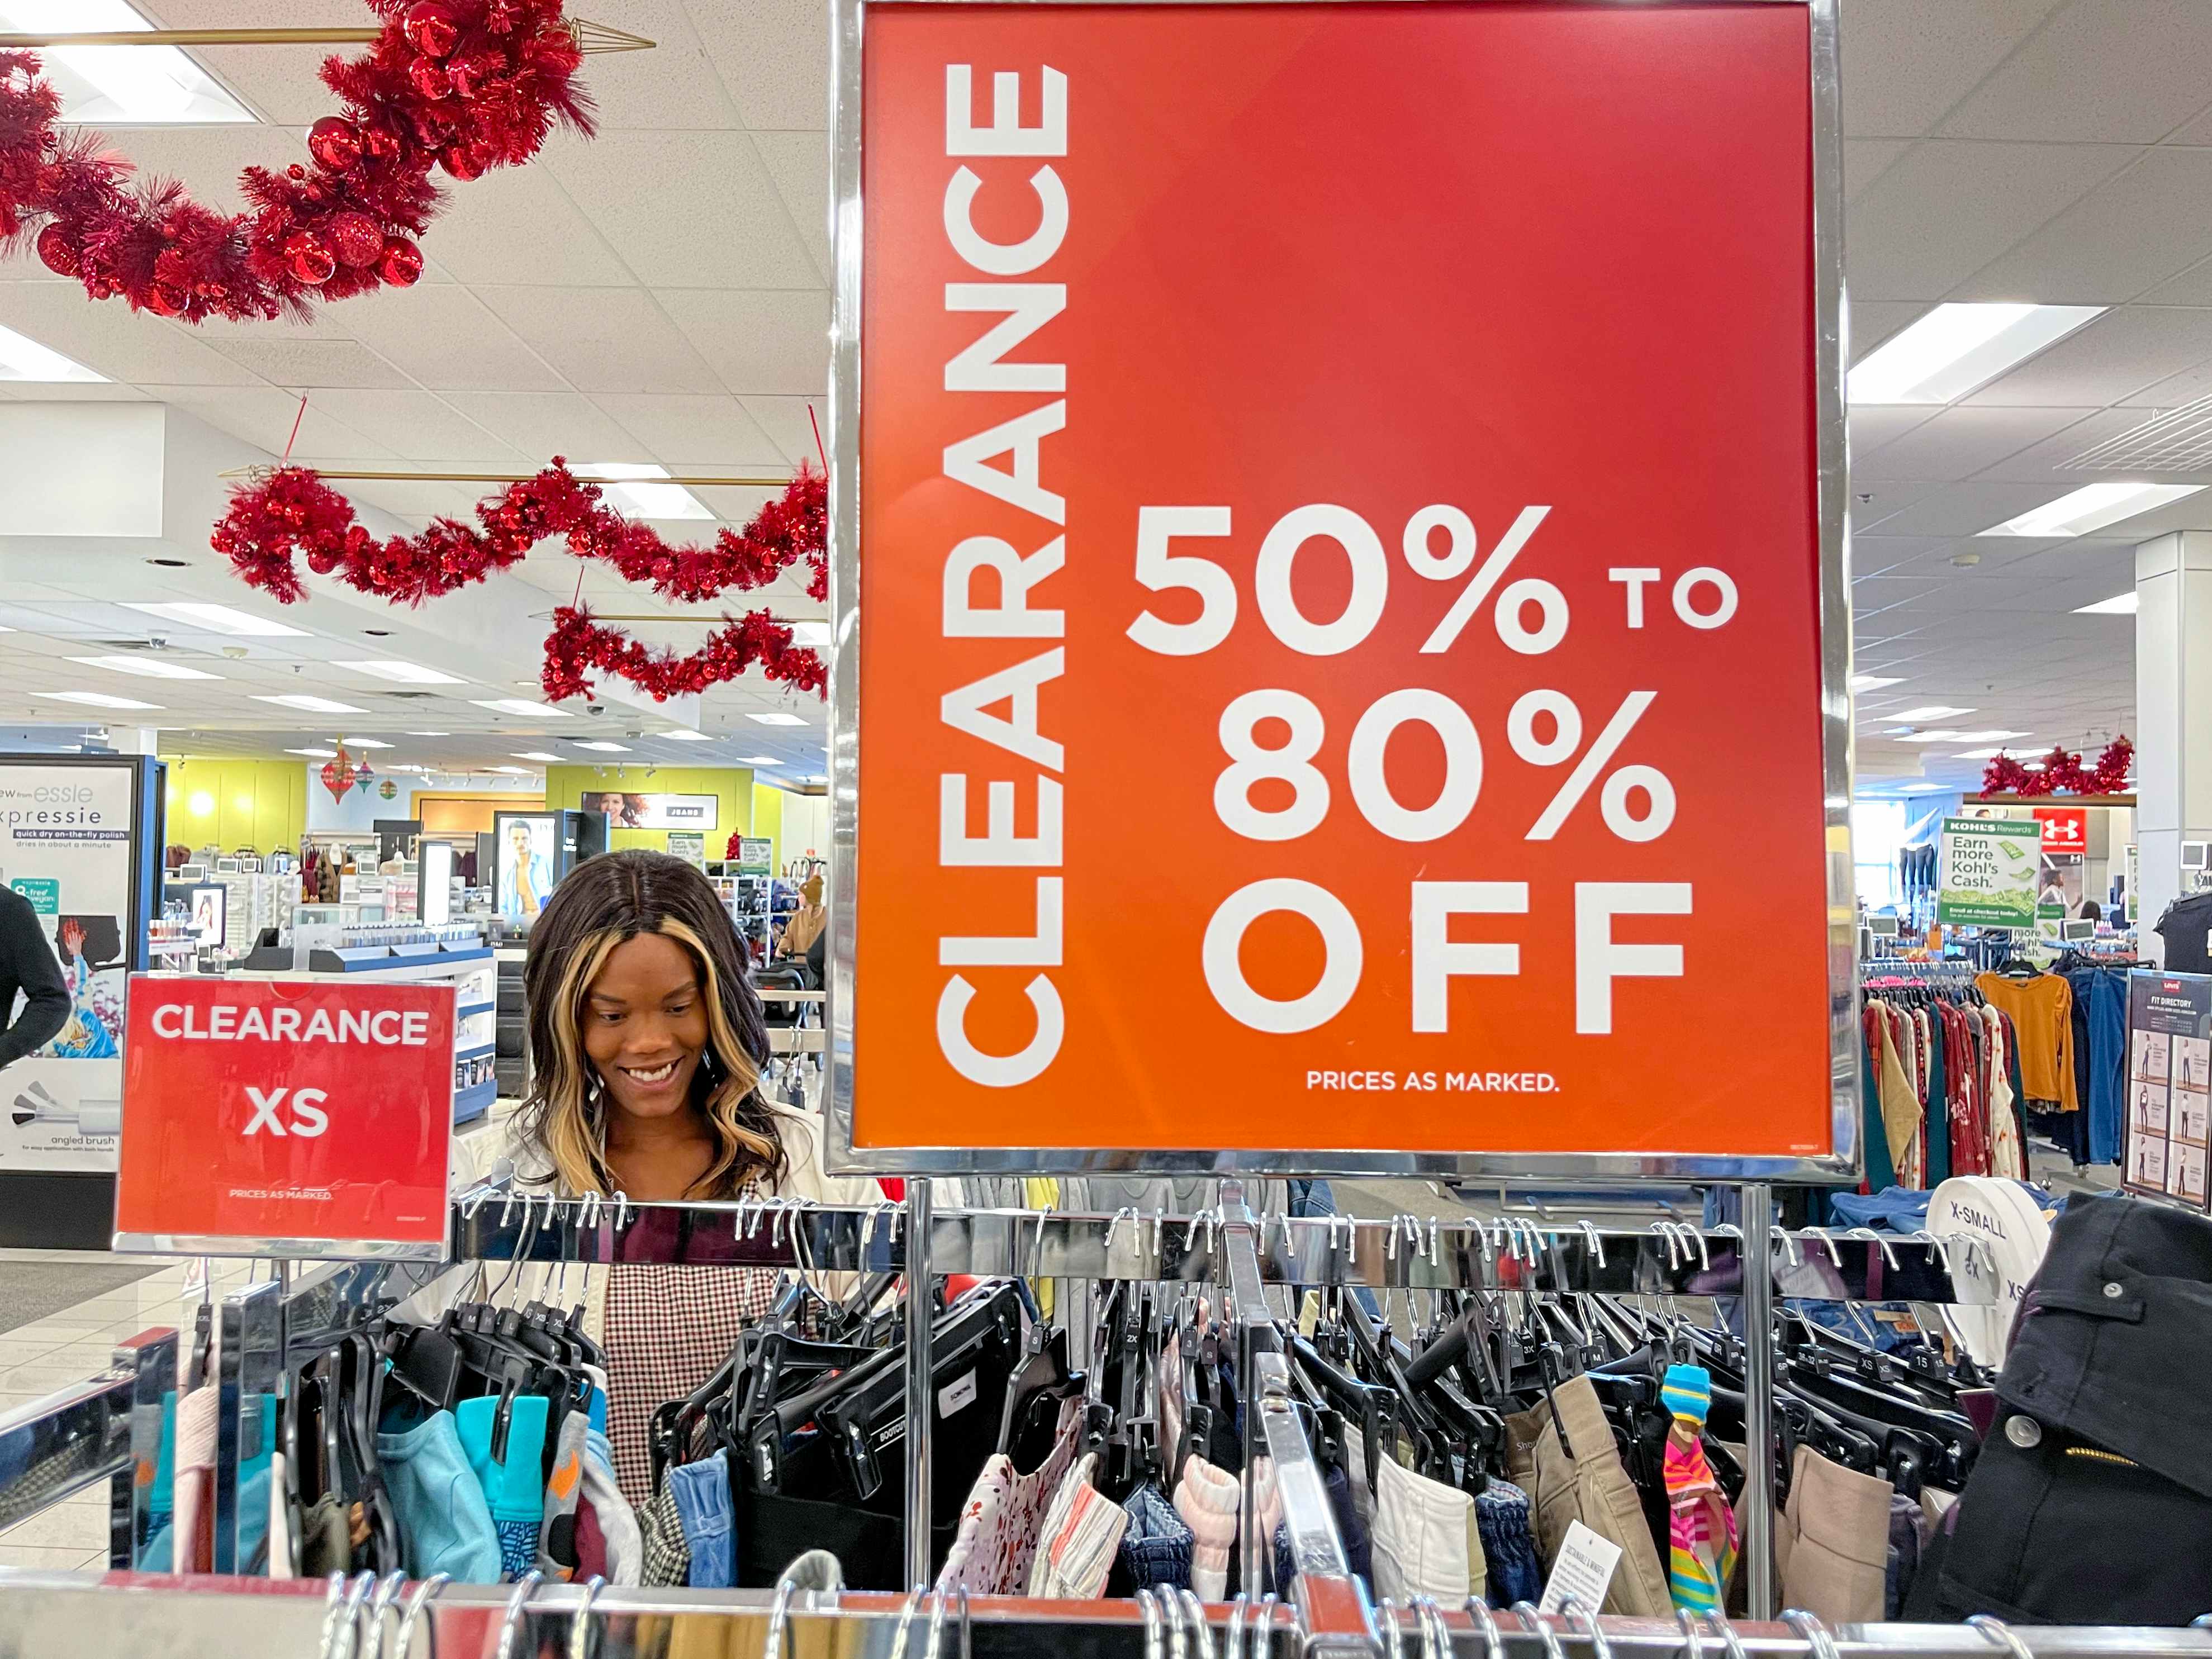 Kohl's clearance sale with amazing $400 savings! : r/Frugal